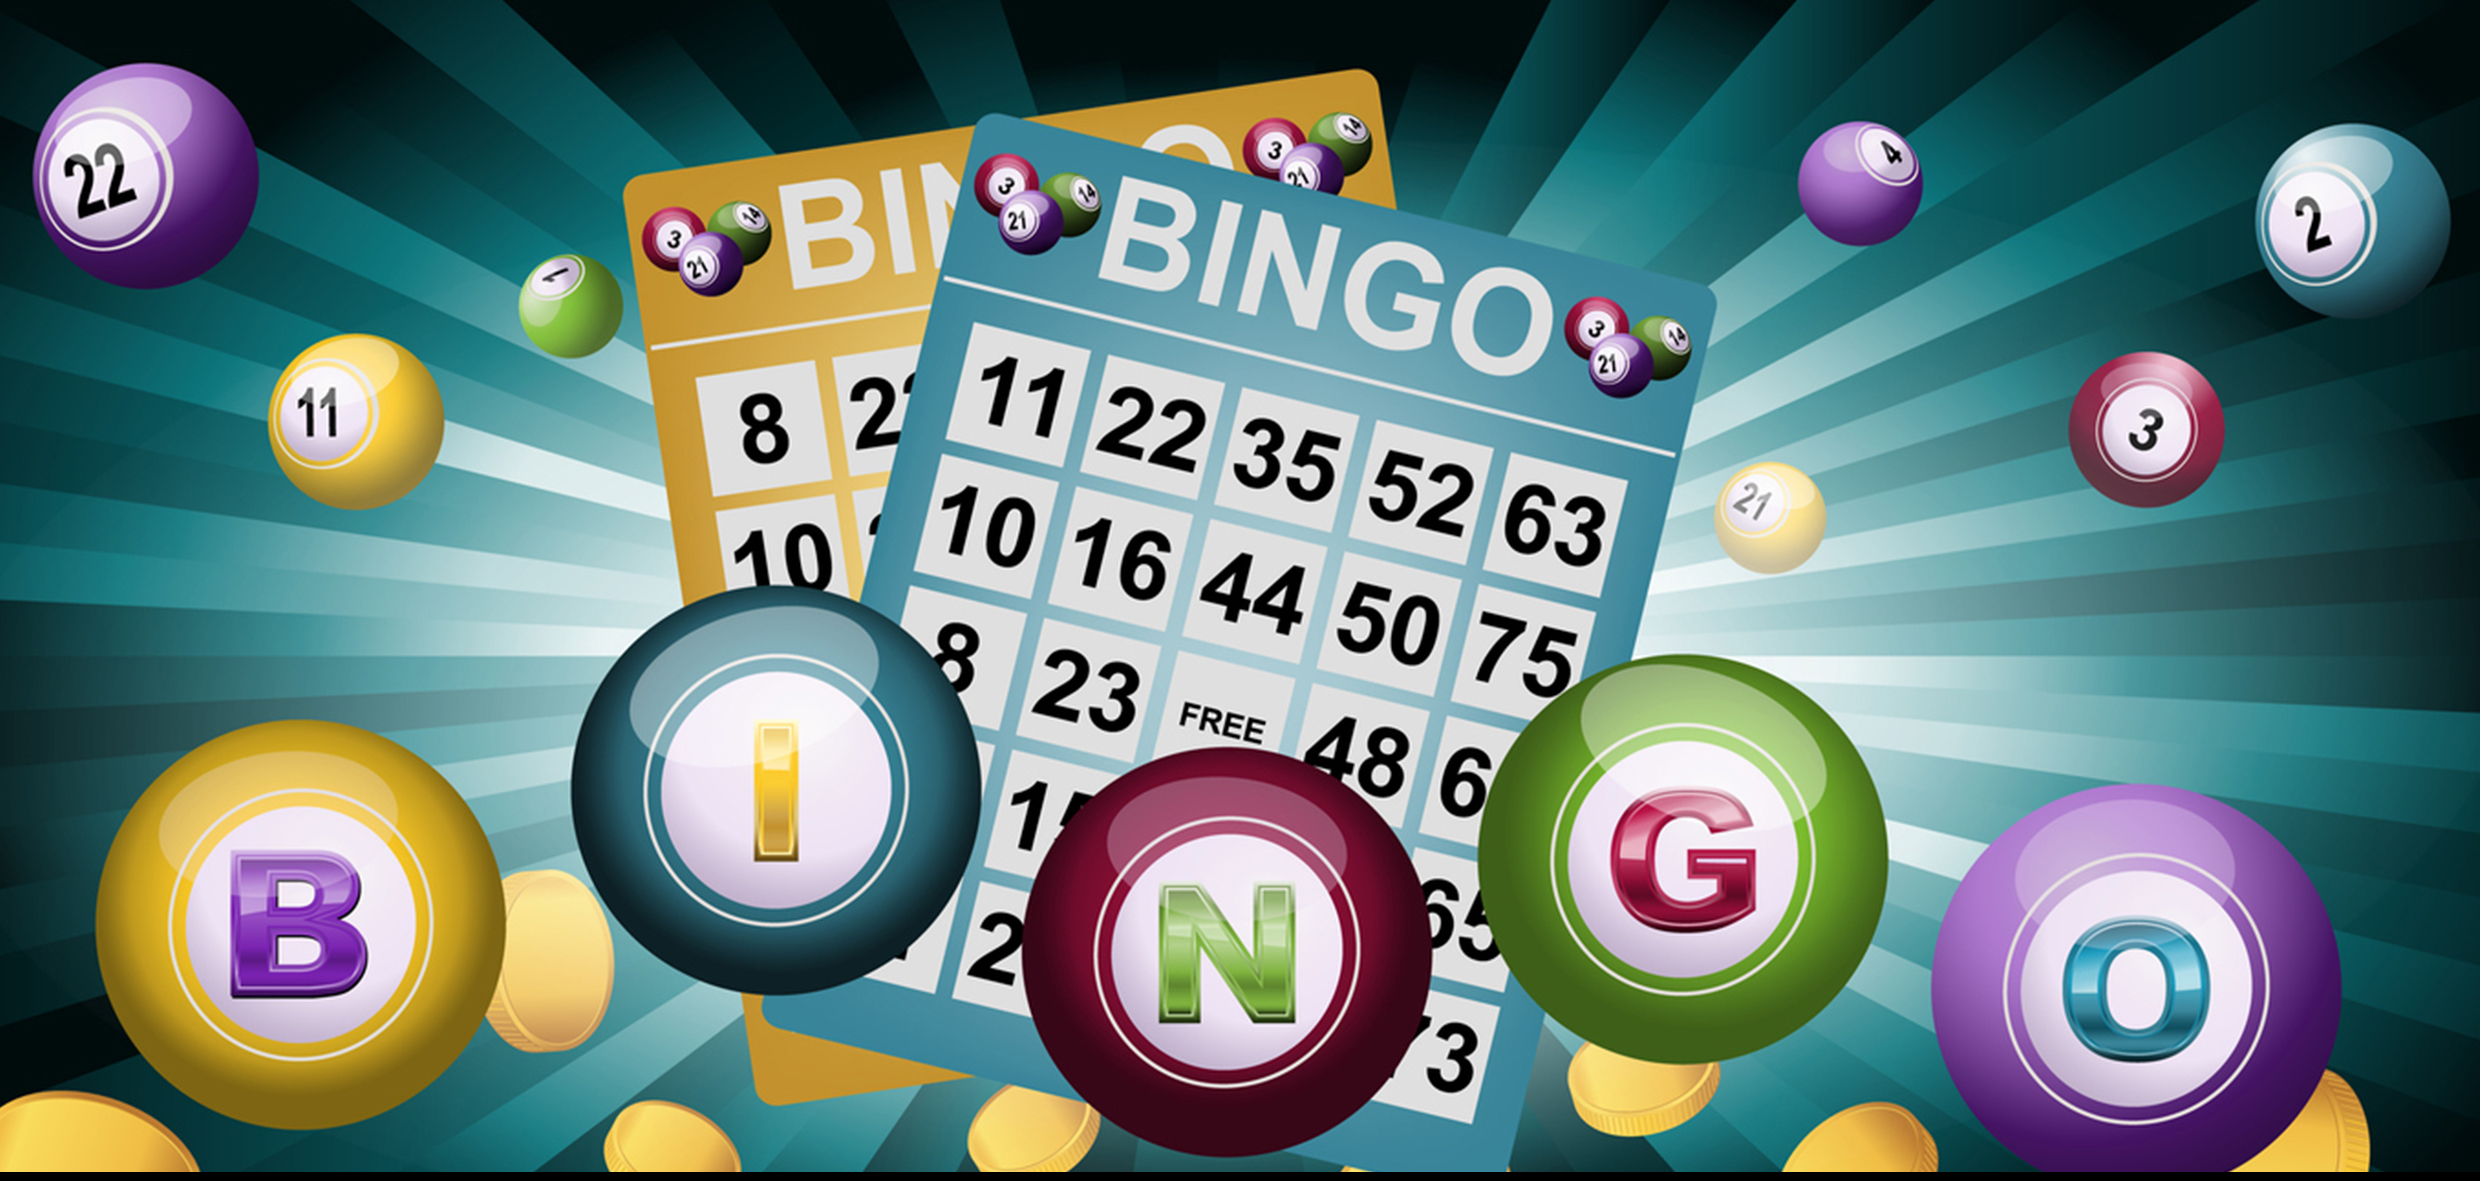 Tips for playing bingo online